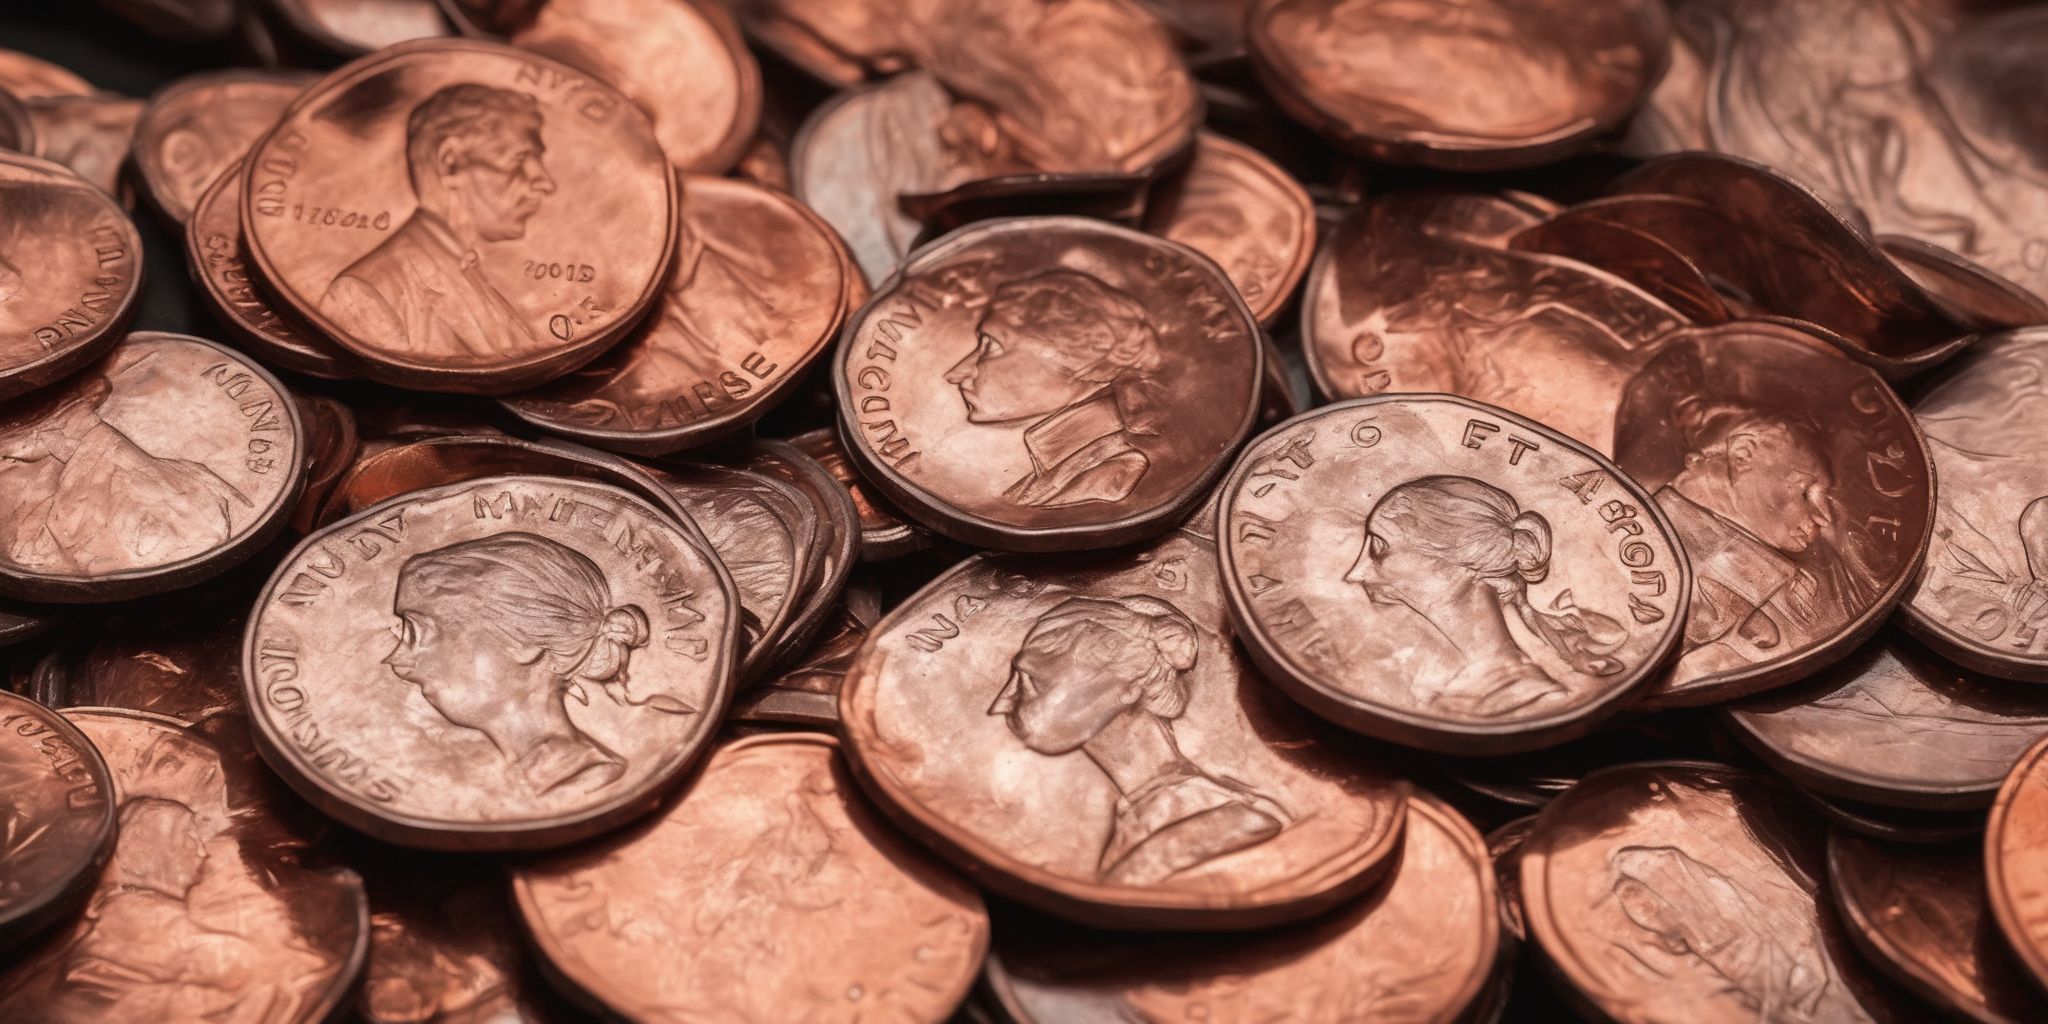 Penny pinching  in realistic, photographic style